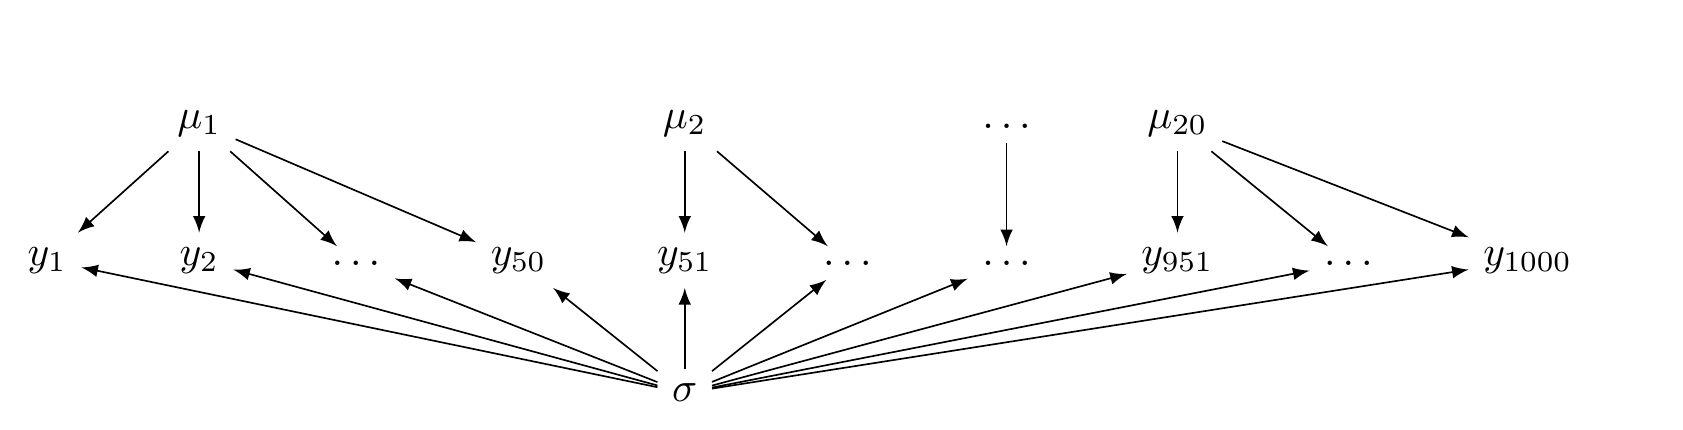 A directed acyclic graph illustrating a no pooling model.